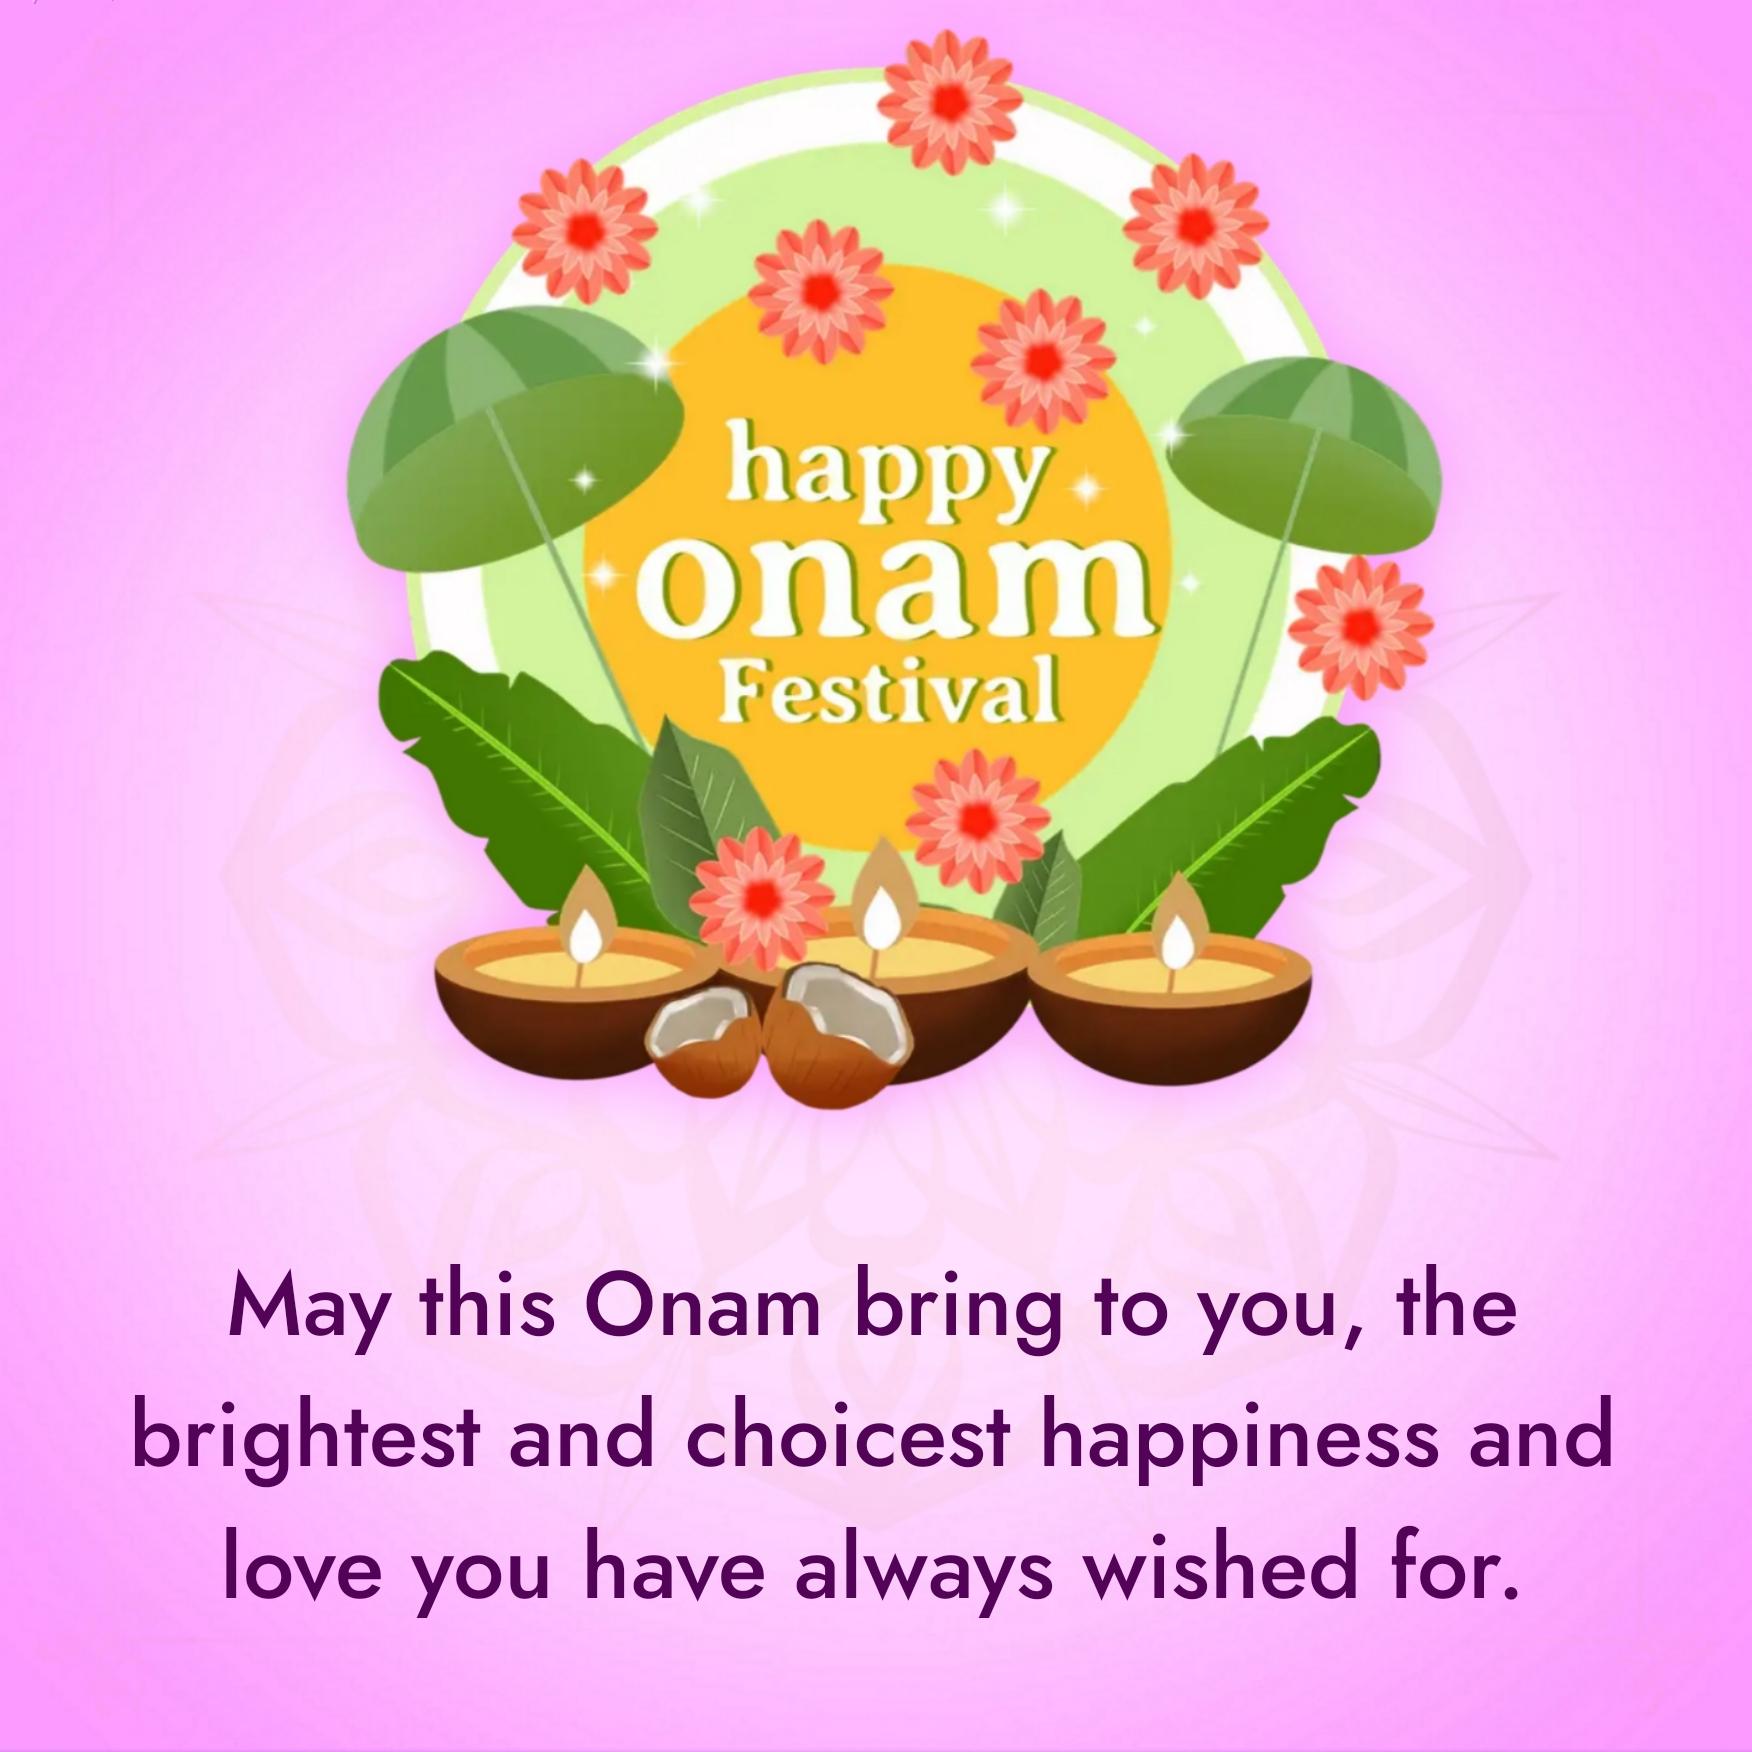 May this Onam bring to you the brightest and choicest happiness